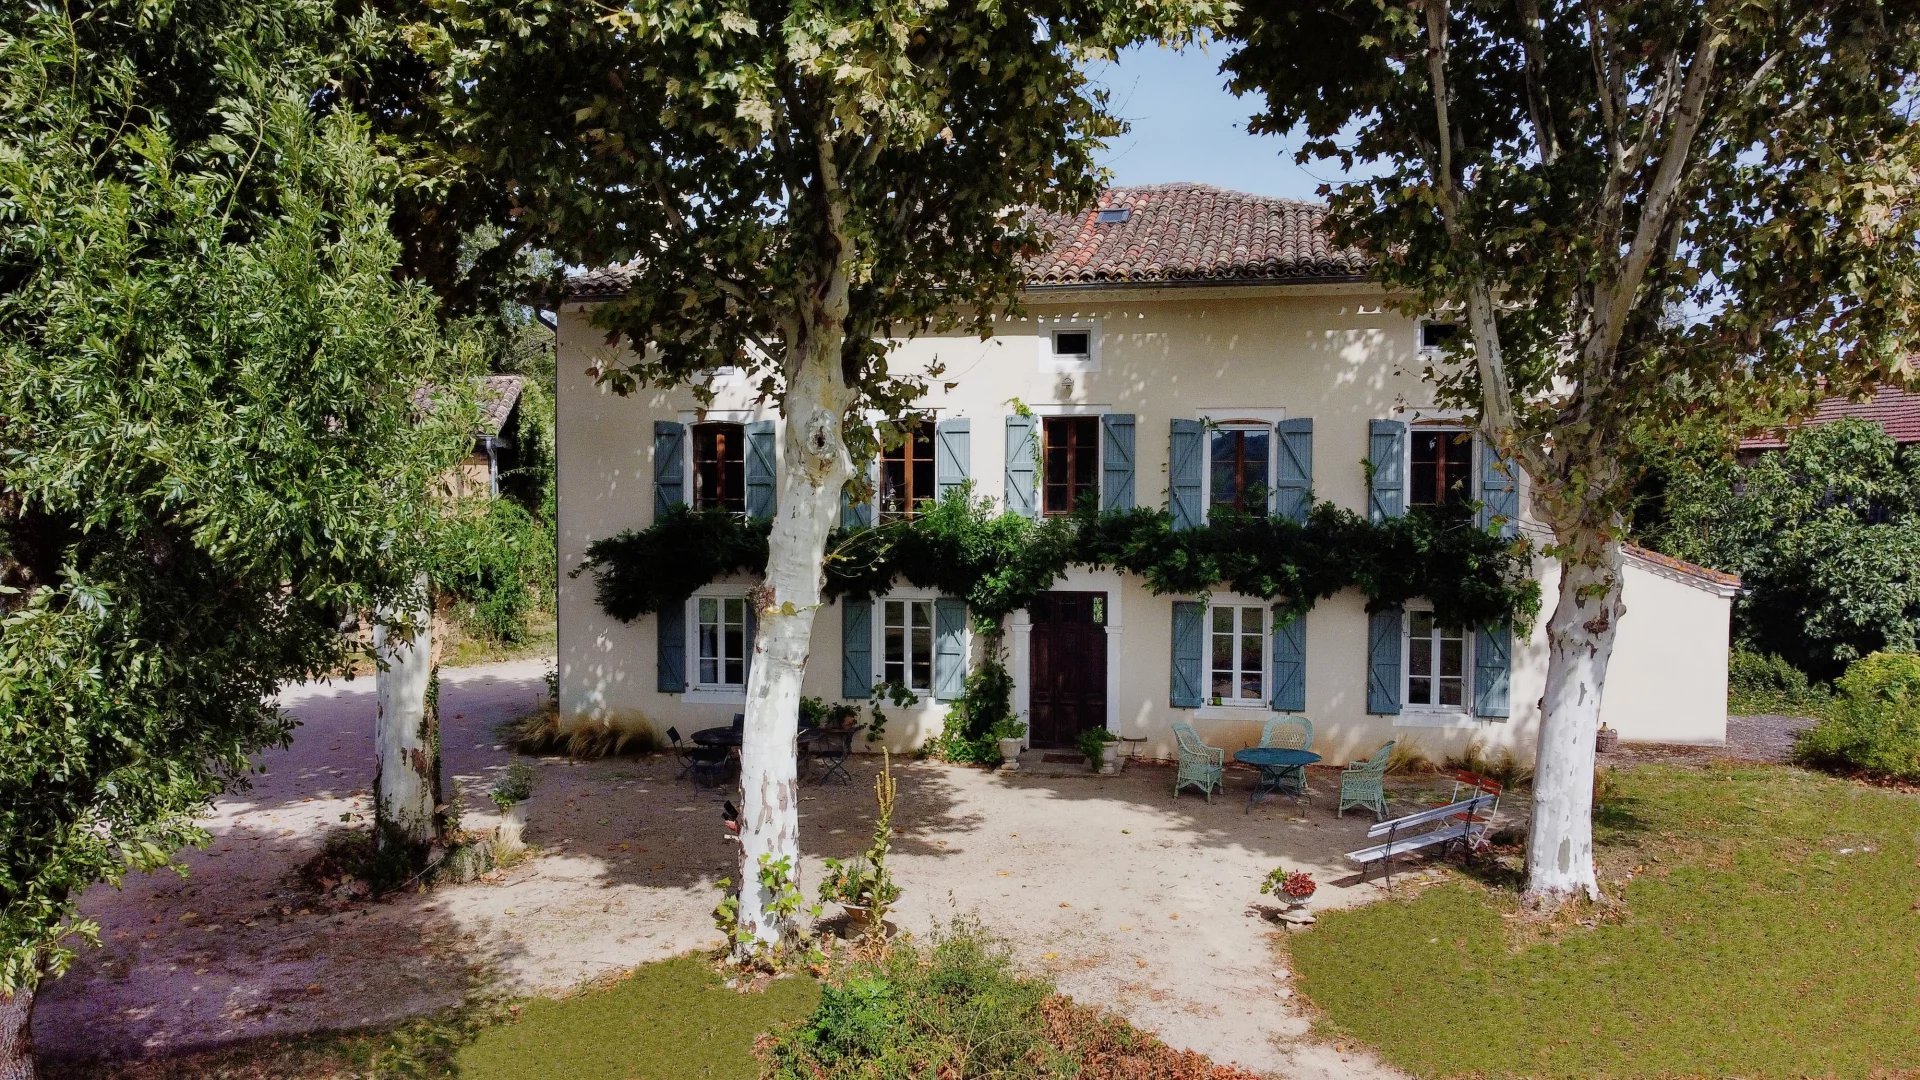 Beautiful Maison de Maître in stunning countryside with guesthouse, outbuildings and 7 ha of land